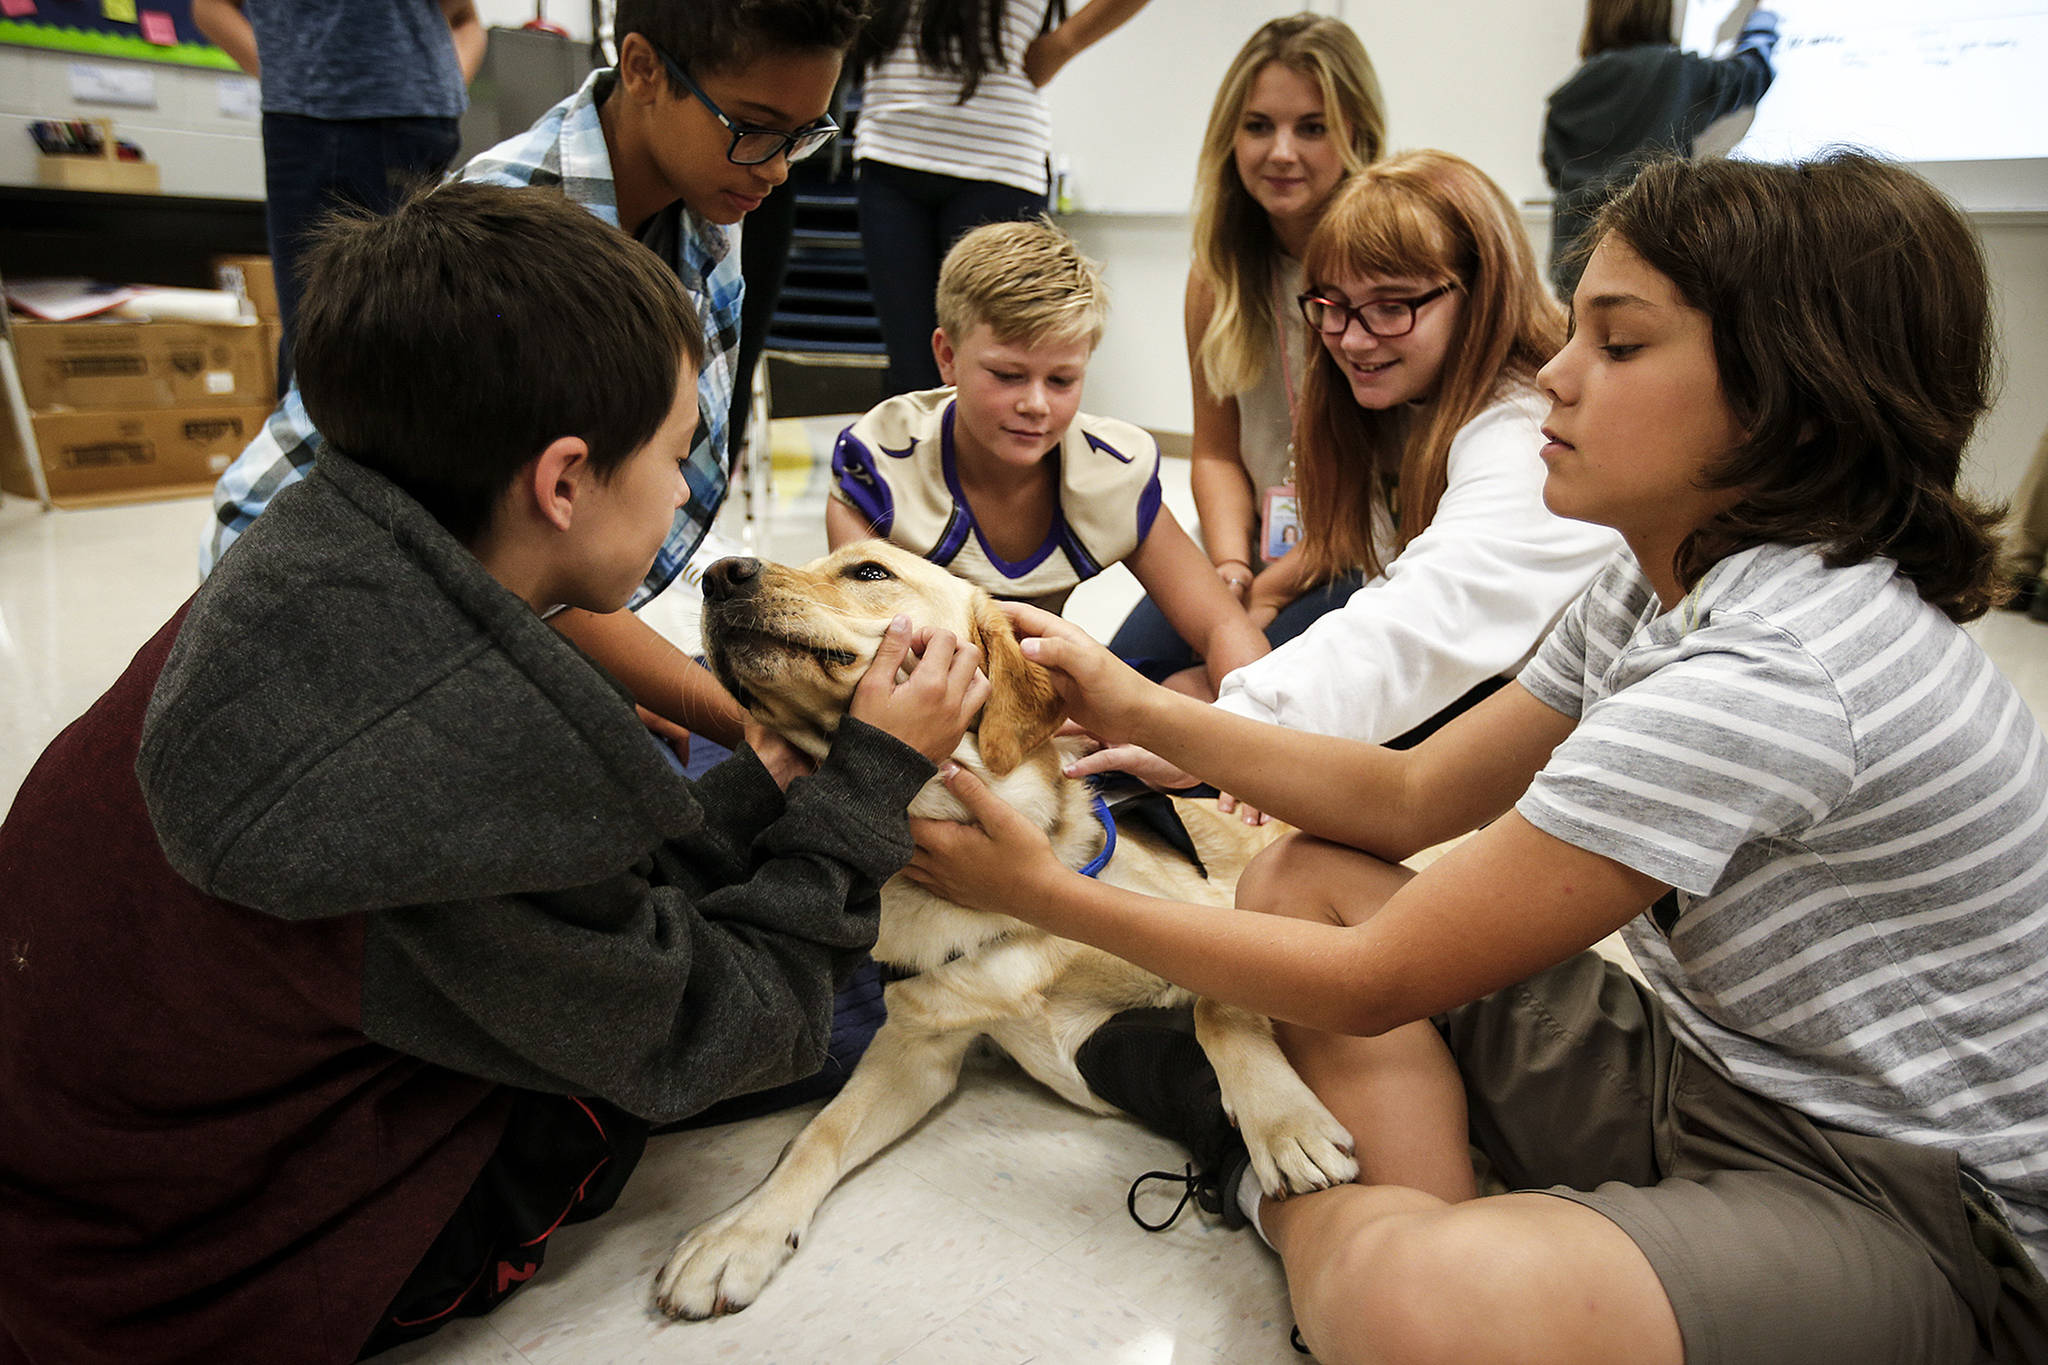 Bruce, a golden retriever-Labrador mix, greets sixth and seventh grade students during a homeroom class at Lake Stevens Middle School on Thursday, Sept. 7. Bruce, a trained facility dog, is bred to provide assistance and emotional support to people in a group environment. (Ian Terry / The Herald)